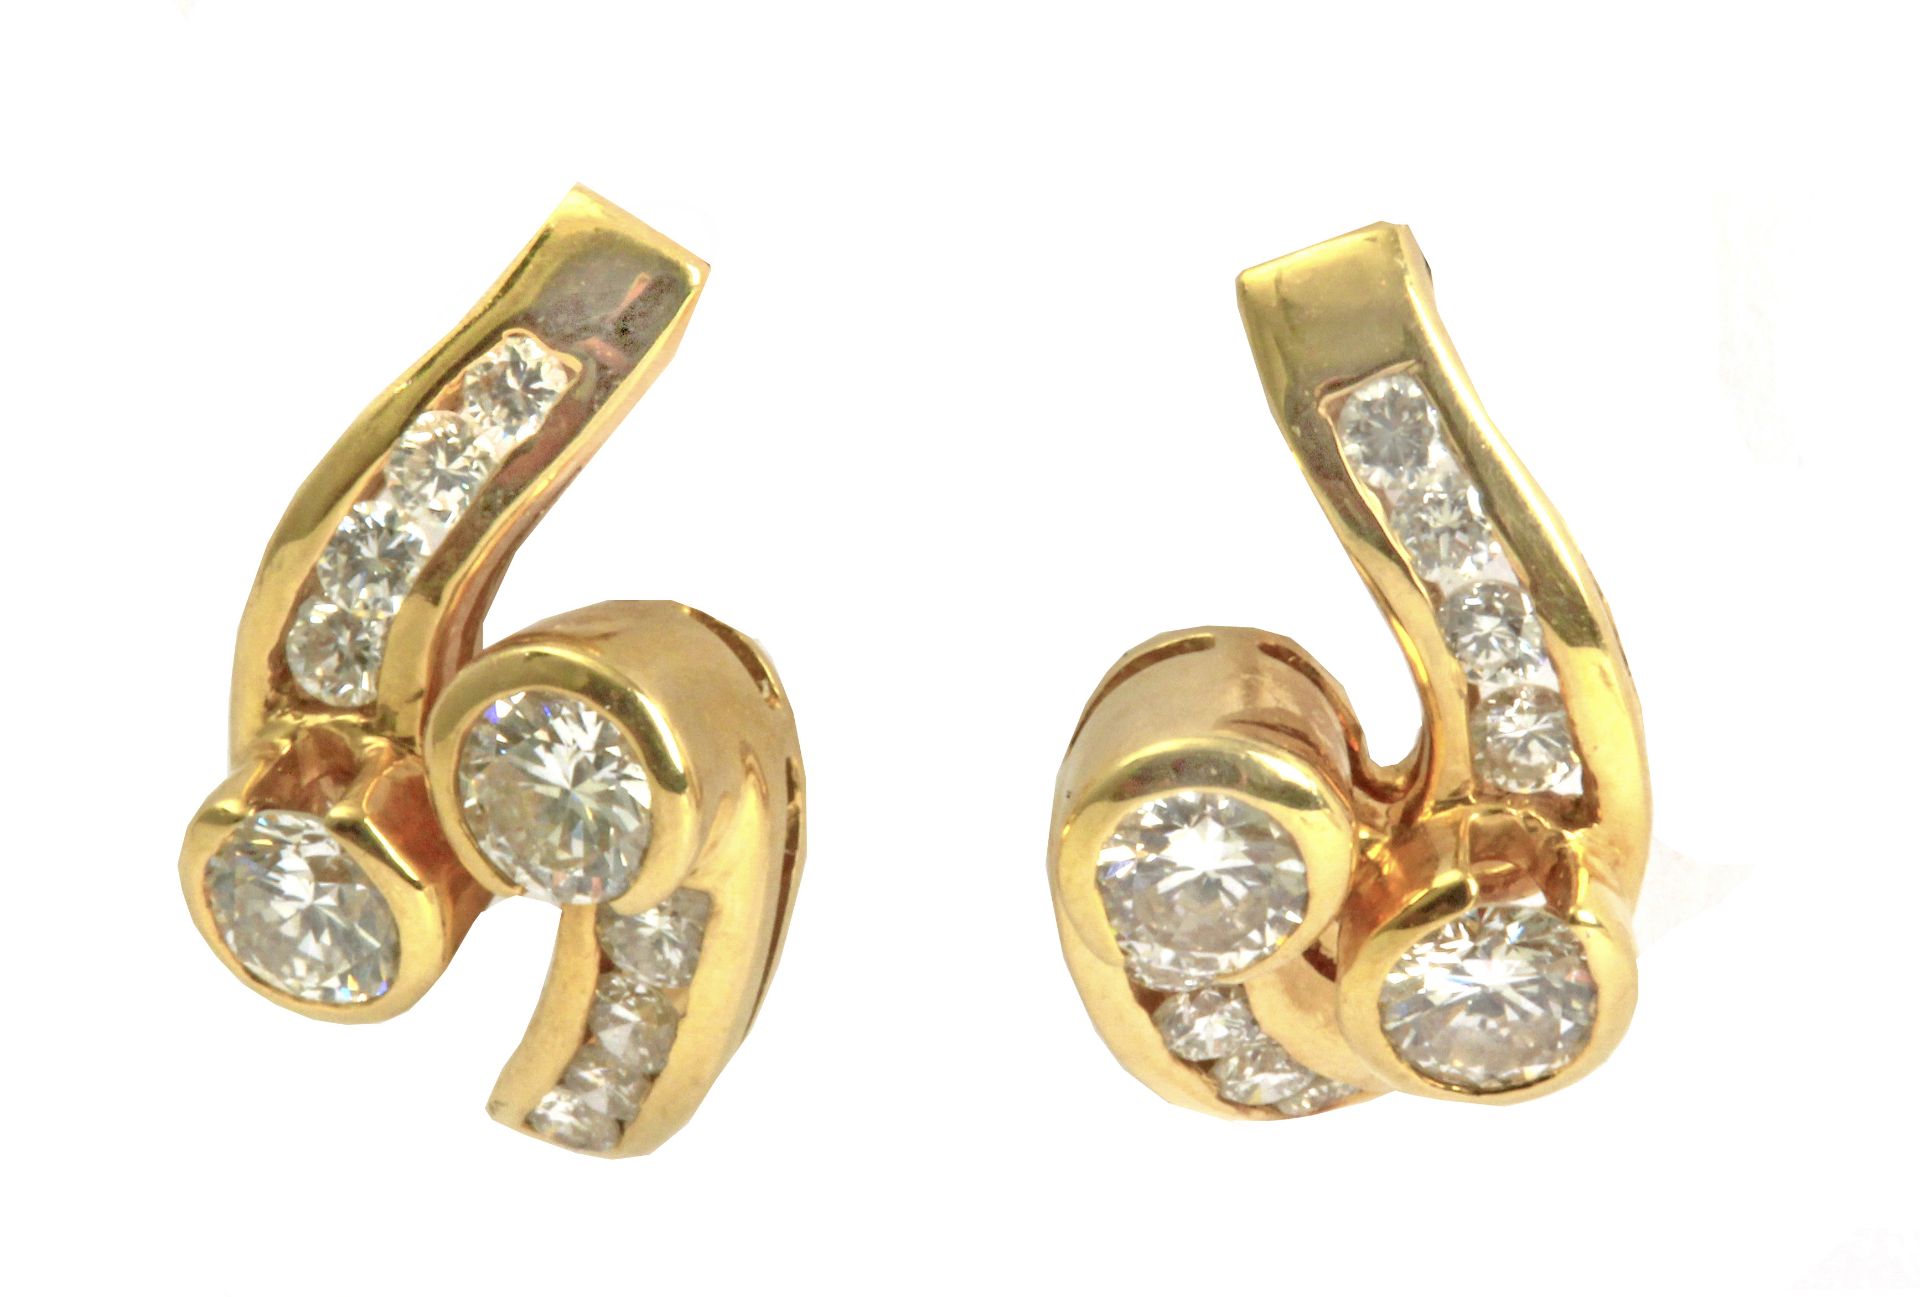 A pair of earrings with an 18 k. yellow gold and round brilliant cut diamonds